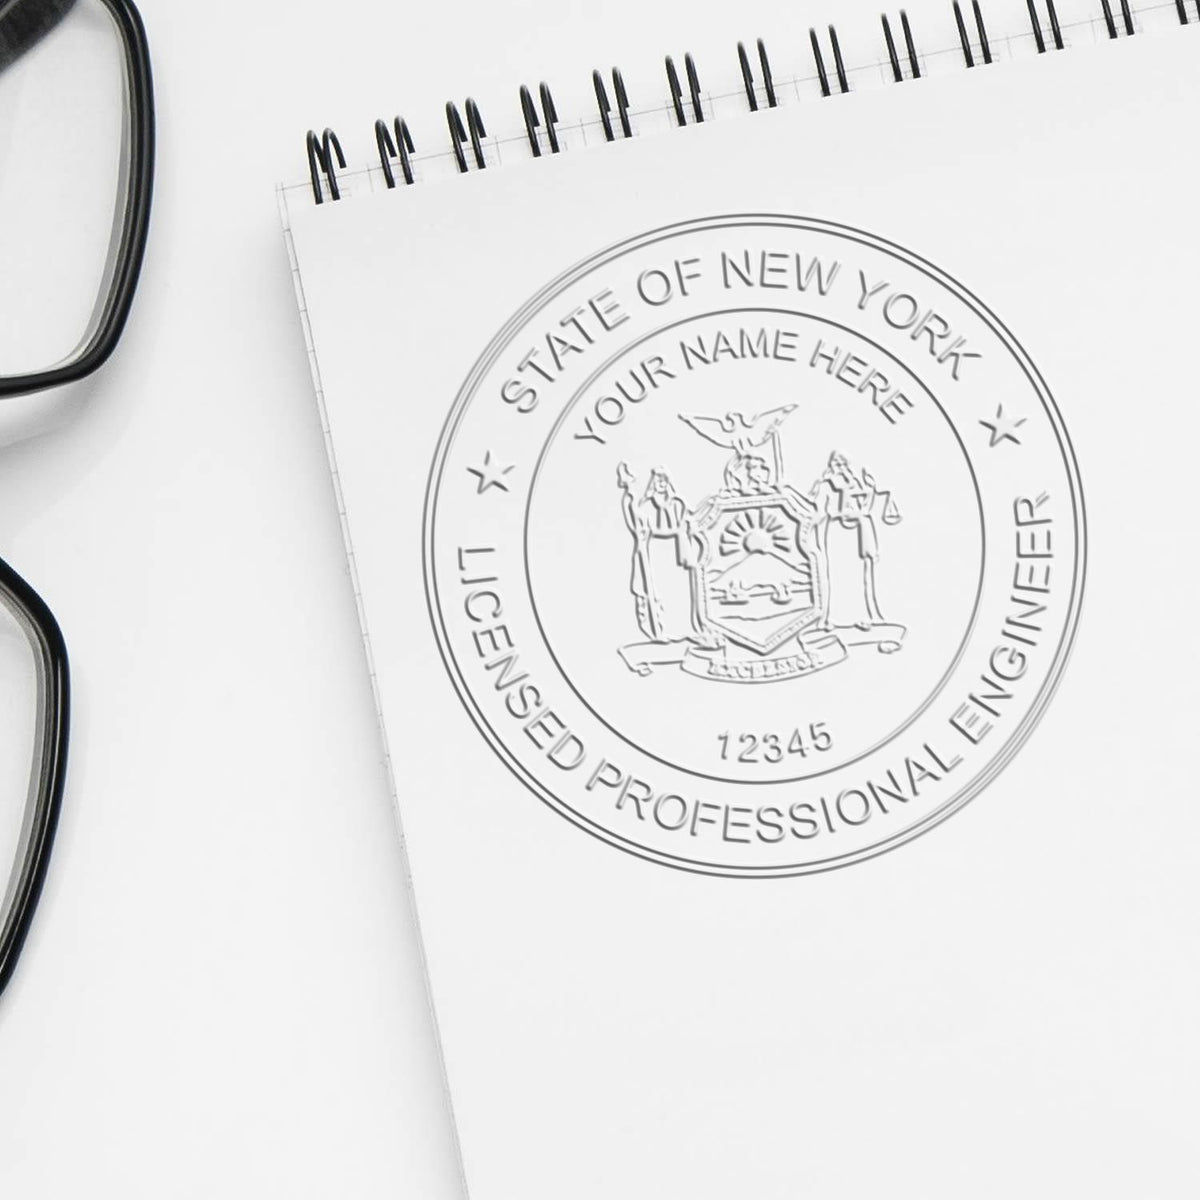 A stamped impression of the New York Engineer Desk Seal in this stylish lifestyle photo, setting the tone for a unique and personalized product.